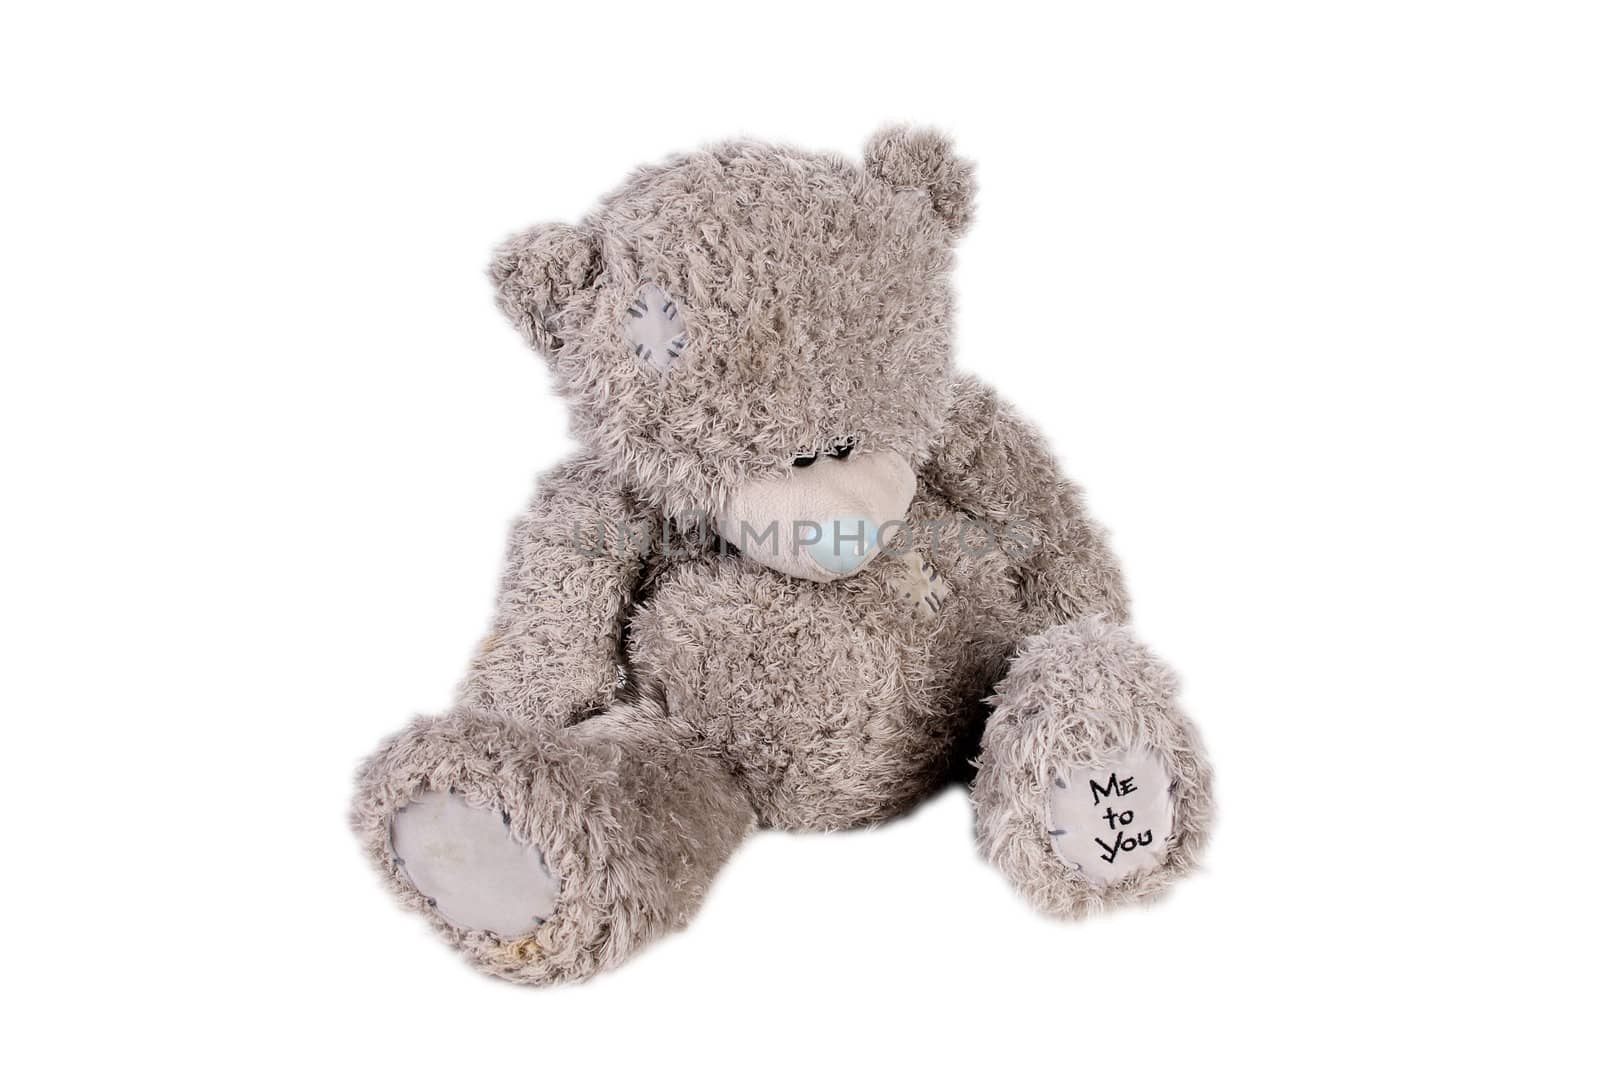 old teddy bear toy isolated over white